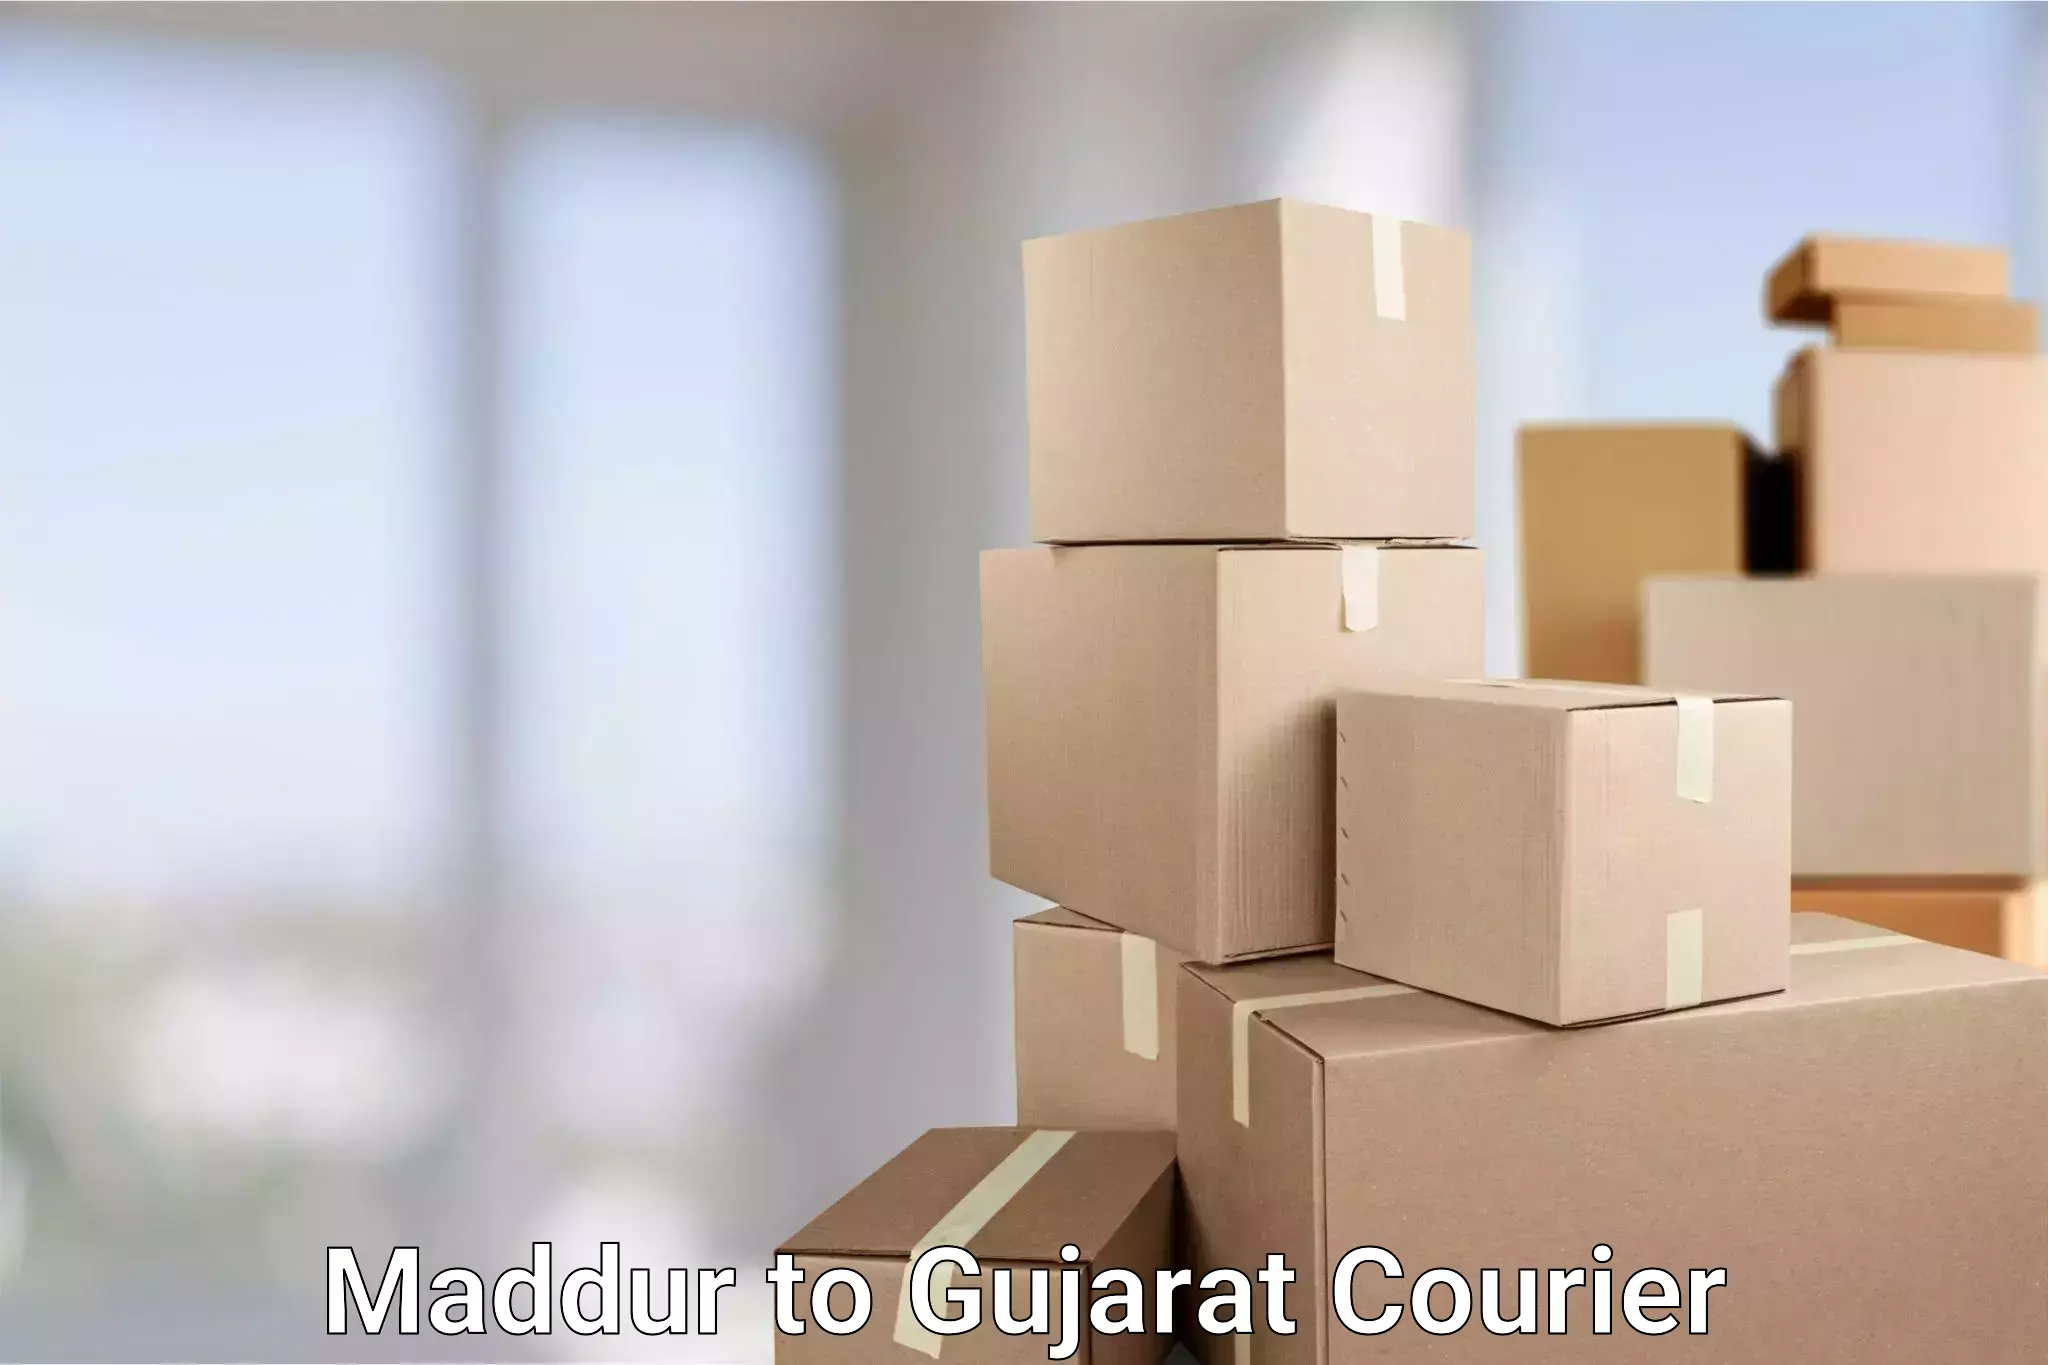 Global courier networks Maddur to Gujarat